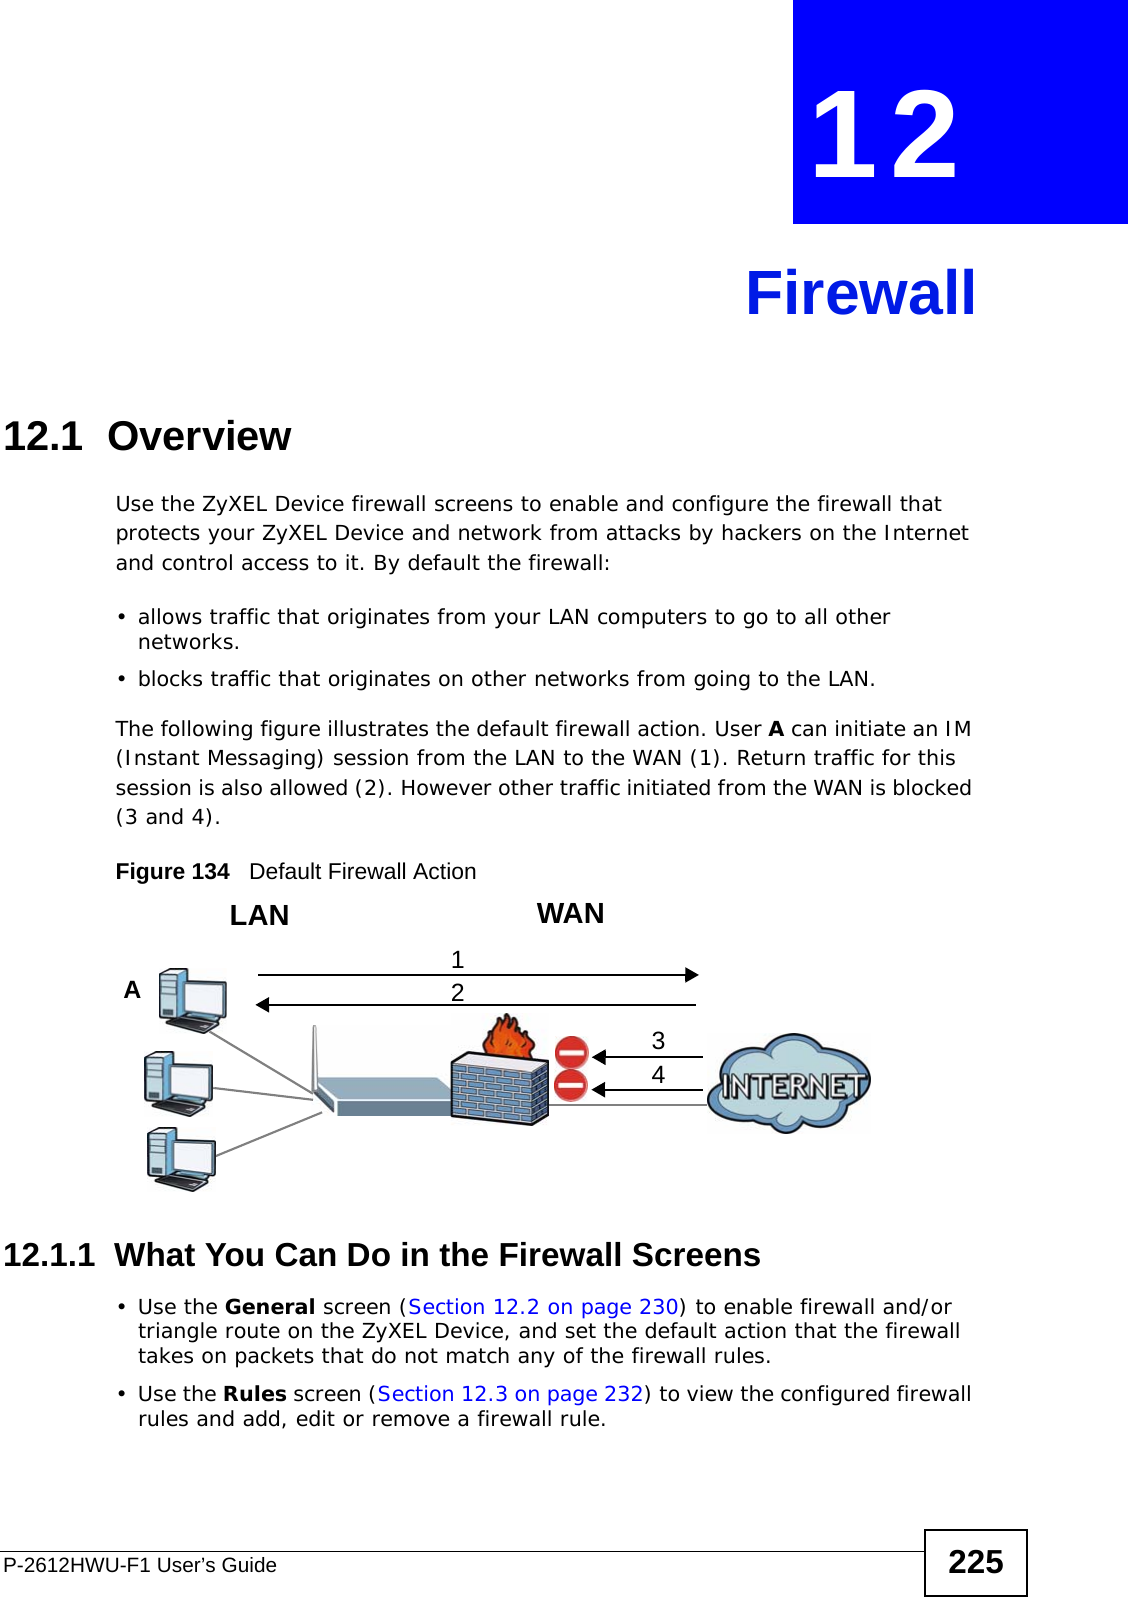 P-2612HWU-F1 User’s Guide 225CHAPTER  12 Firewall12.1  OverviewUse the ZyXEL Device firewall screens to enable and configure the firewall that protects your ZyXEL Device and network from attacks by hackers on the Internet and control access to it. By default the firewall:• allows traffic that originates from your LAN computers to go to all other networks. • blocks traffic that originates on other networks from going to the LAN. The following figure illustrates the default firewall action. User A can initiate an IM (Instant Messaging) session from the LAN to the WAN (1). Return traffic for this session is also allowed (2). However other traffic initiated from the WAN is blocked (3 and 4).Figure 134   Default Firewall Action12.1.1  What You Can Do in the Firewall Screens•Use the General screen (Section 12.2 on page 230) to enable firewall and/or triangle route on the ZyXEL Device, and set the default action that the firewall takes on packets that do not match any of the firewall rules.•Use the Rules screen (Section 12.3 on page 232) to view the configured firewall rules and add, edit or remove a firewall rule.WANLAN3412A